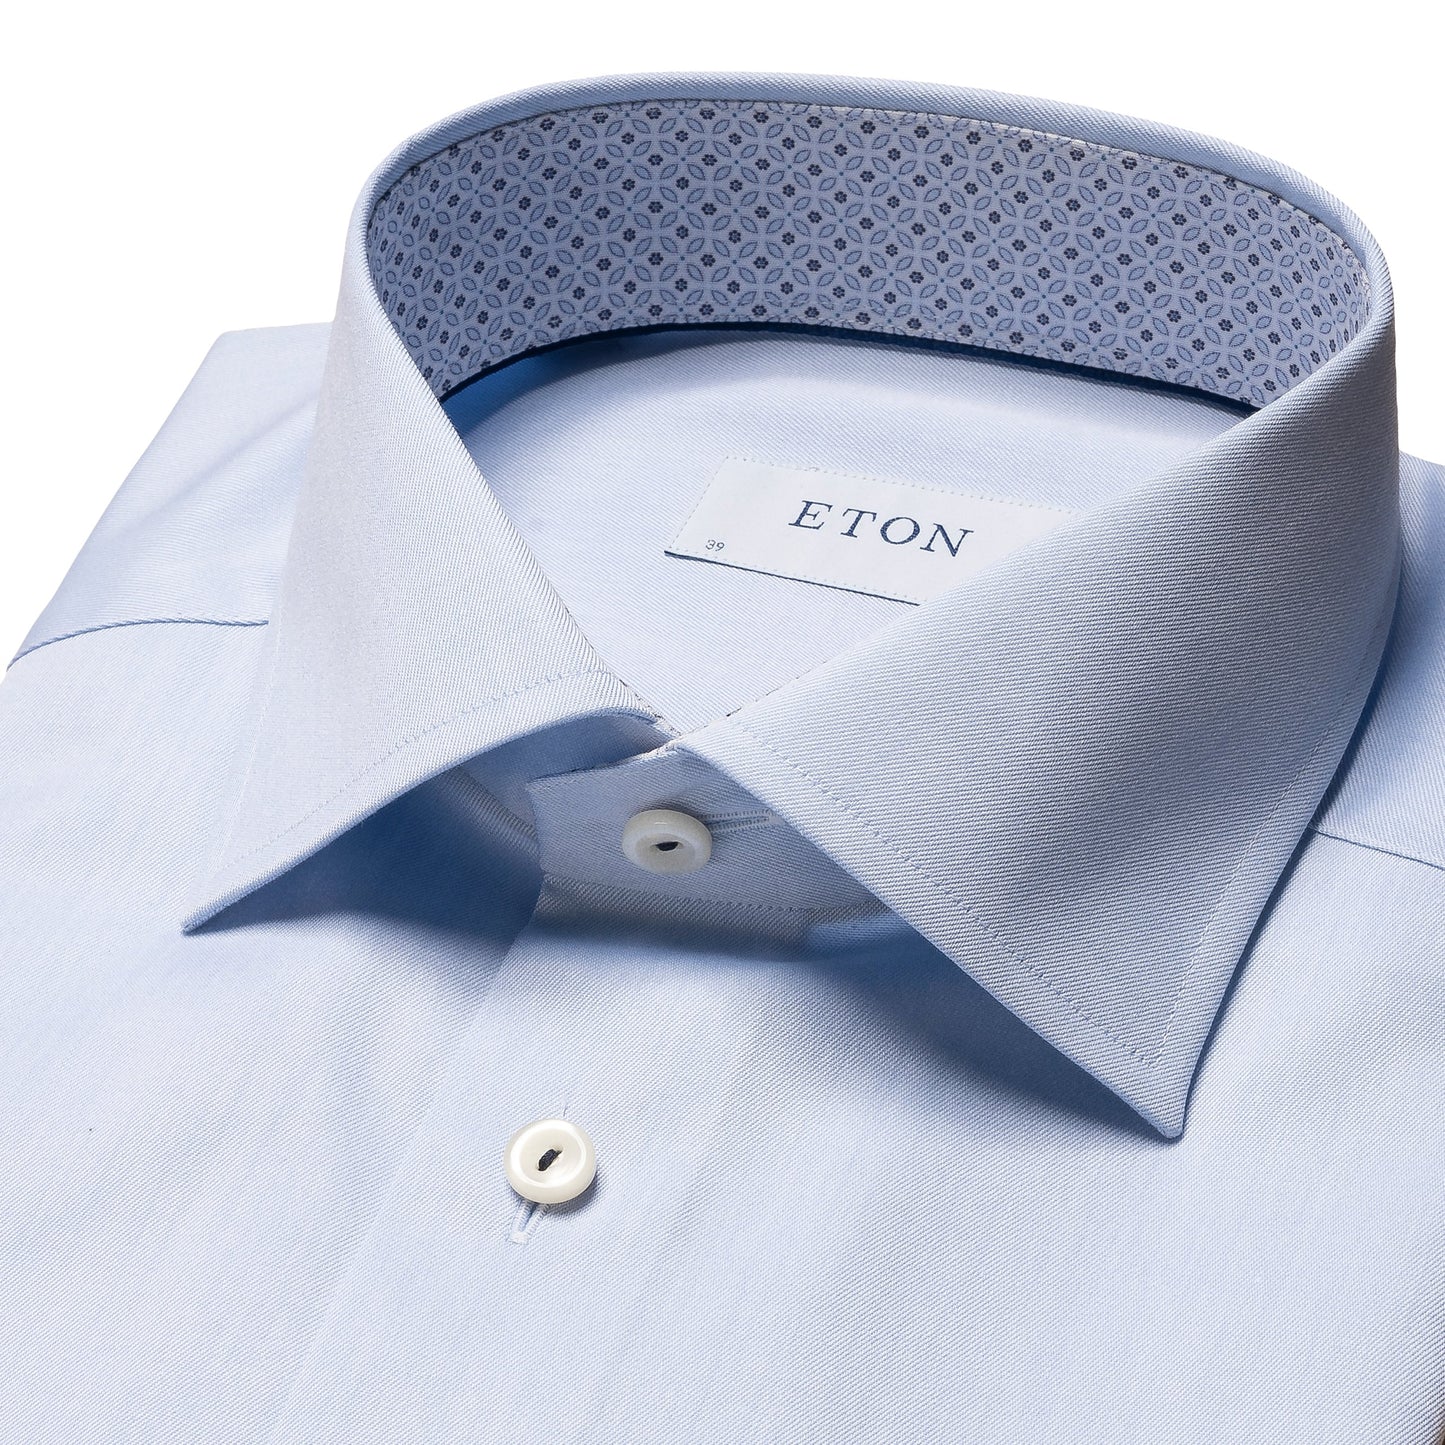 ETON Signature Twill Contemporary Fit Shirt in Light Blue with Floral Contrast Details 10001046021